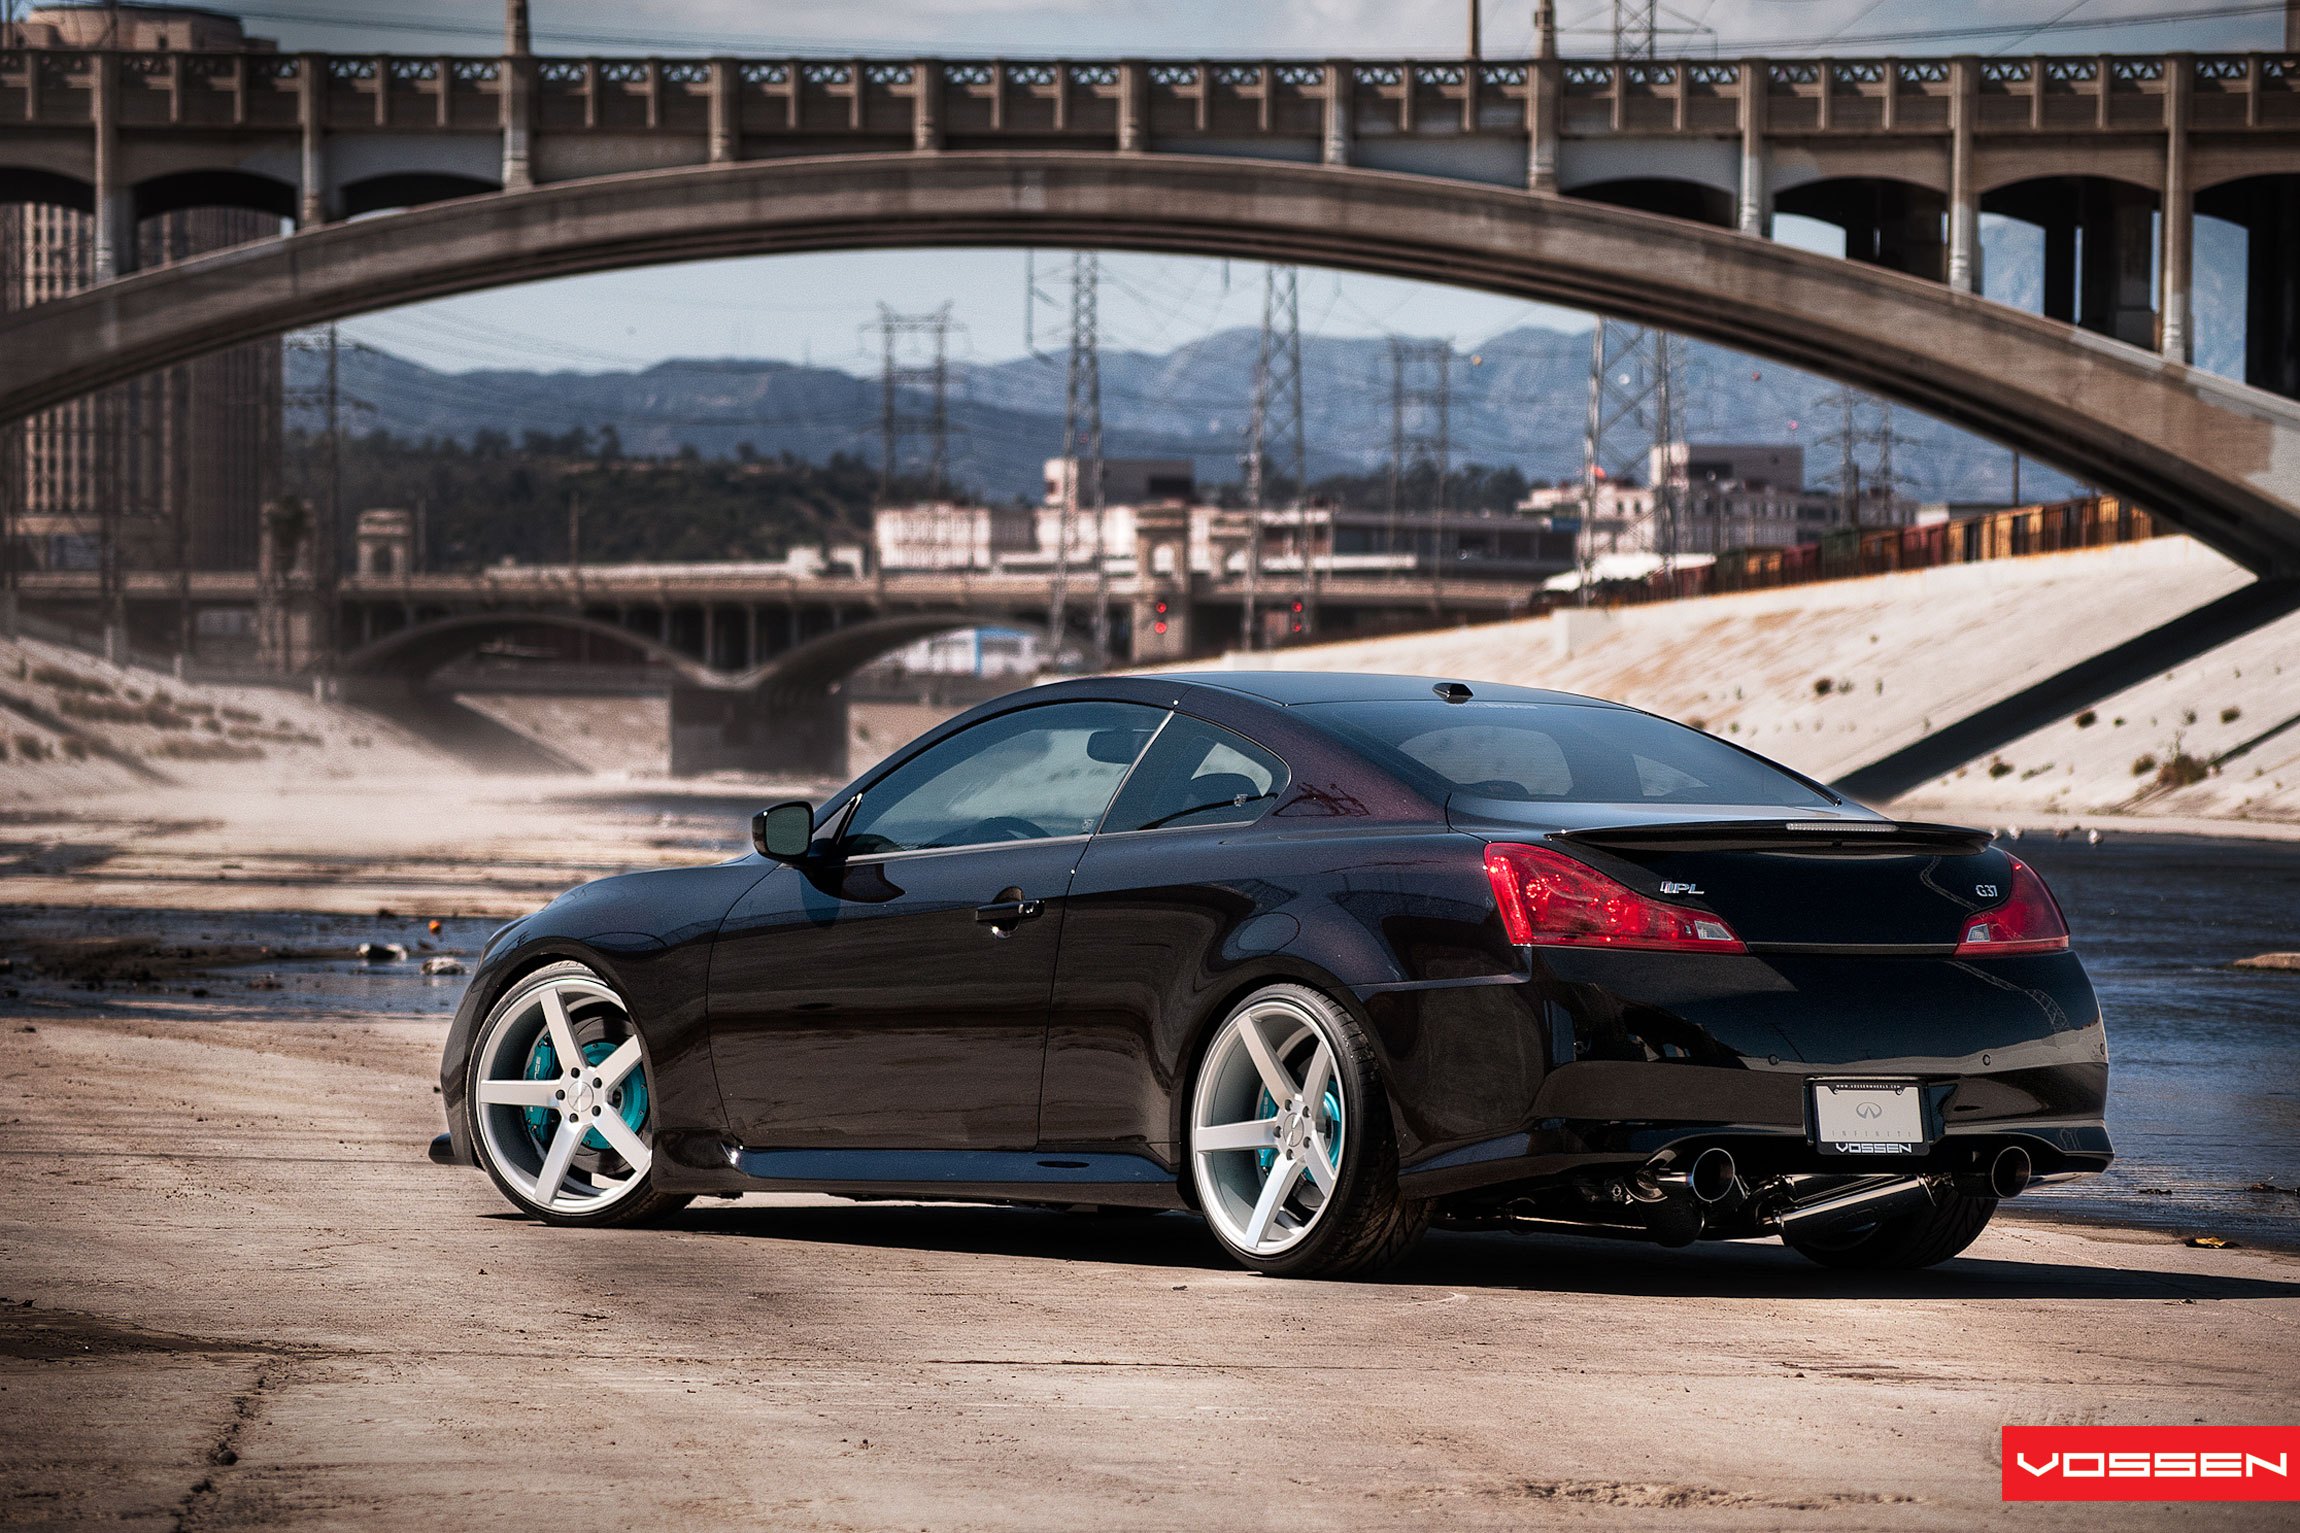 Black Infiniti G37 PL with Aftermarket Exhaust System - Photo by Vossen